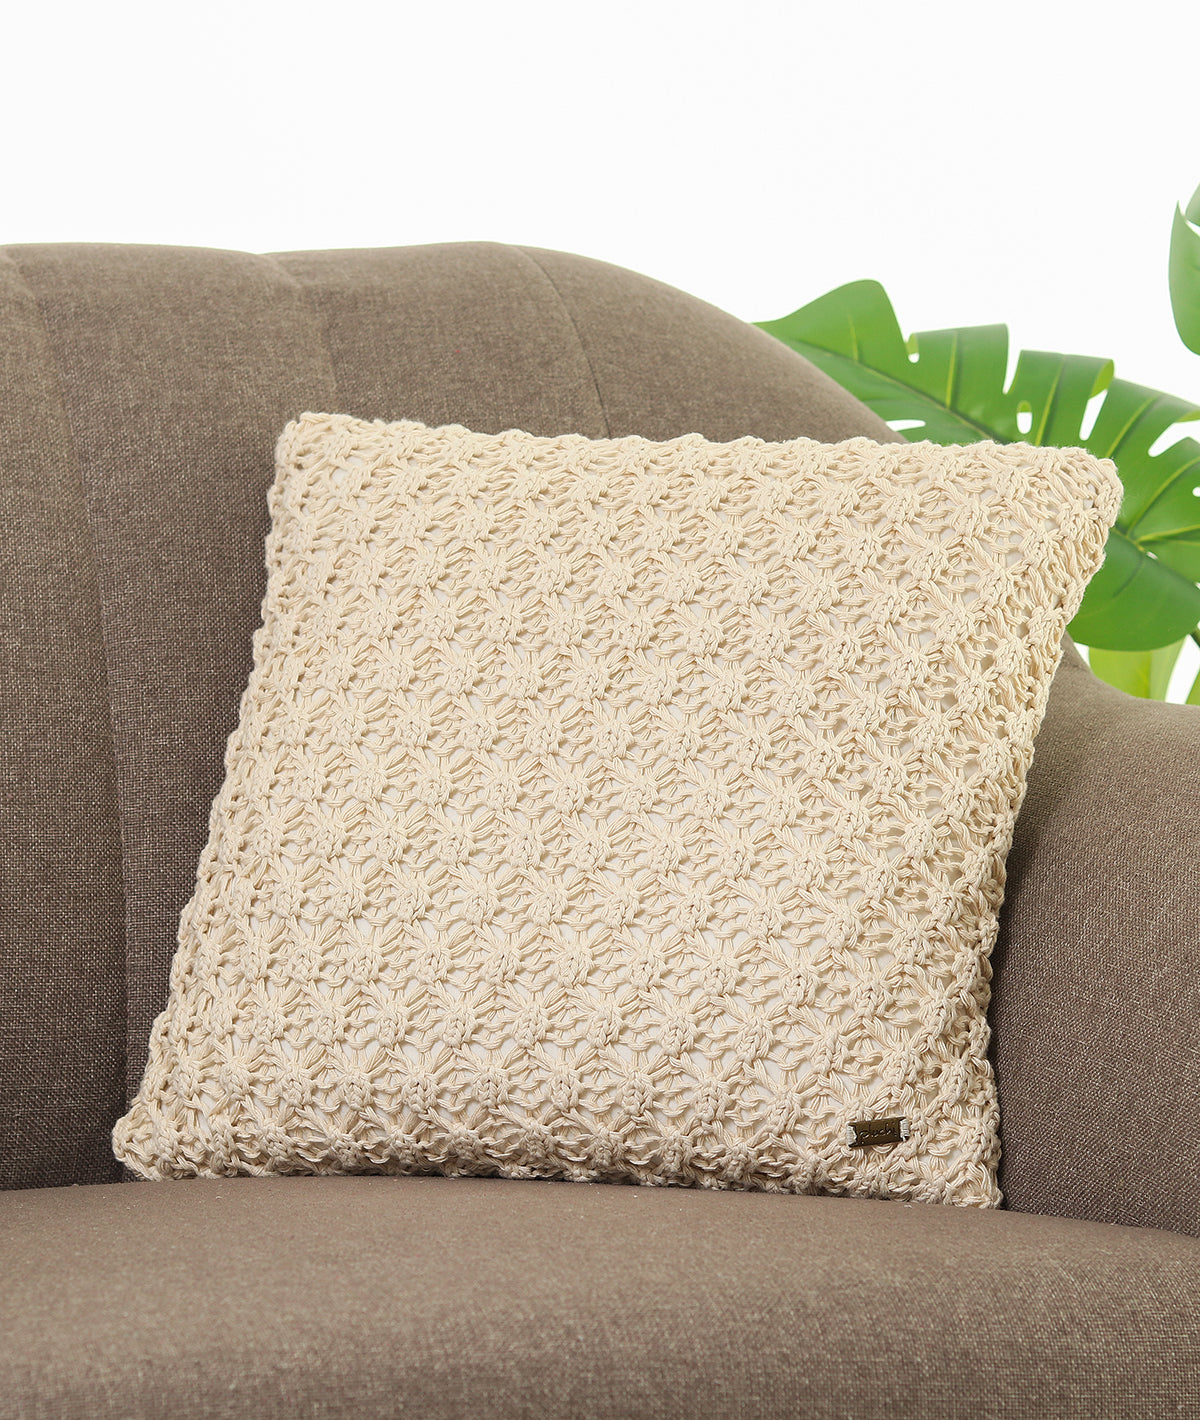 Popcorn Natural Cotton Knitted Decorative 16 X 16 Inches Cushion Cover